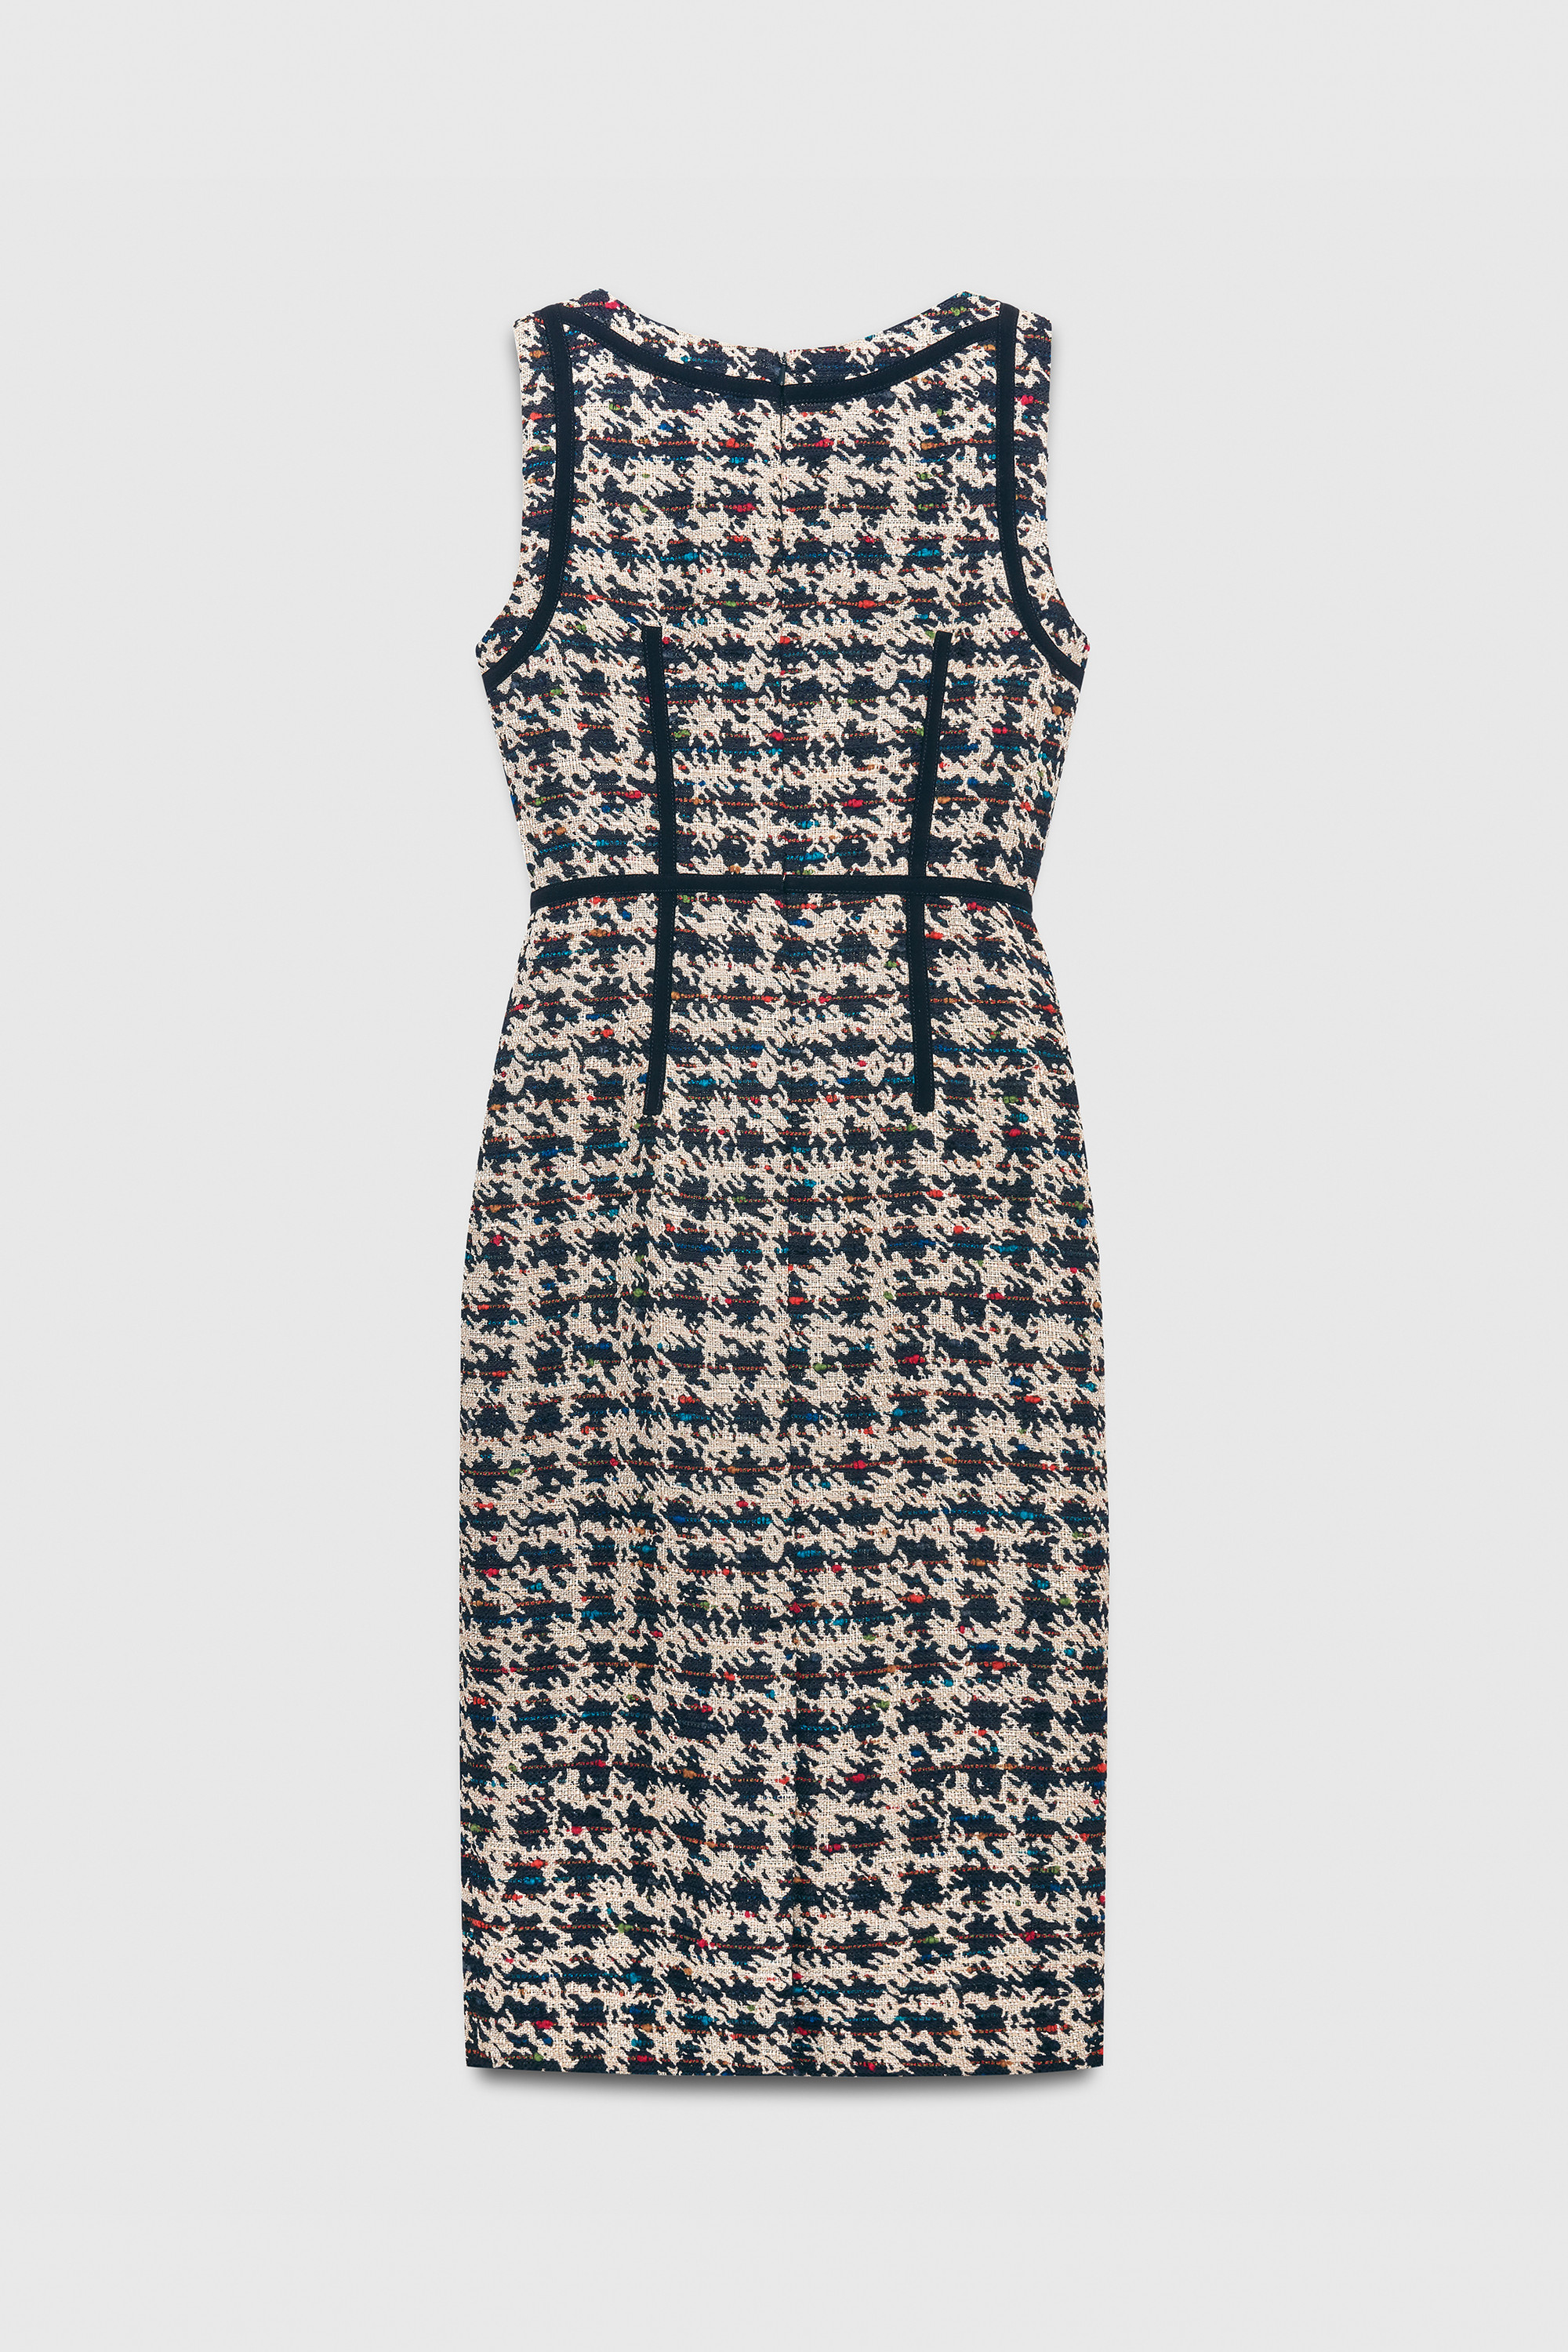 Corla Dress Navy Multicolour Tweed - Welcome to the Fold LTD